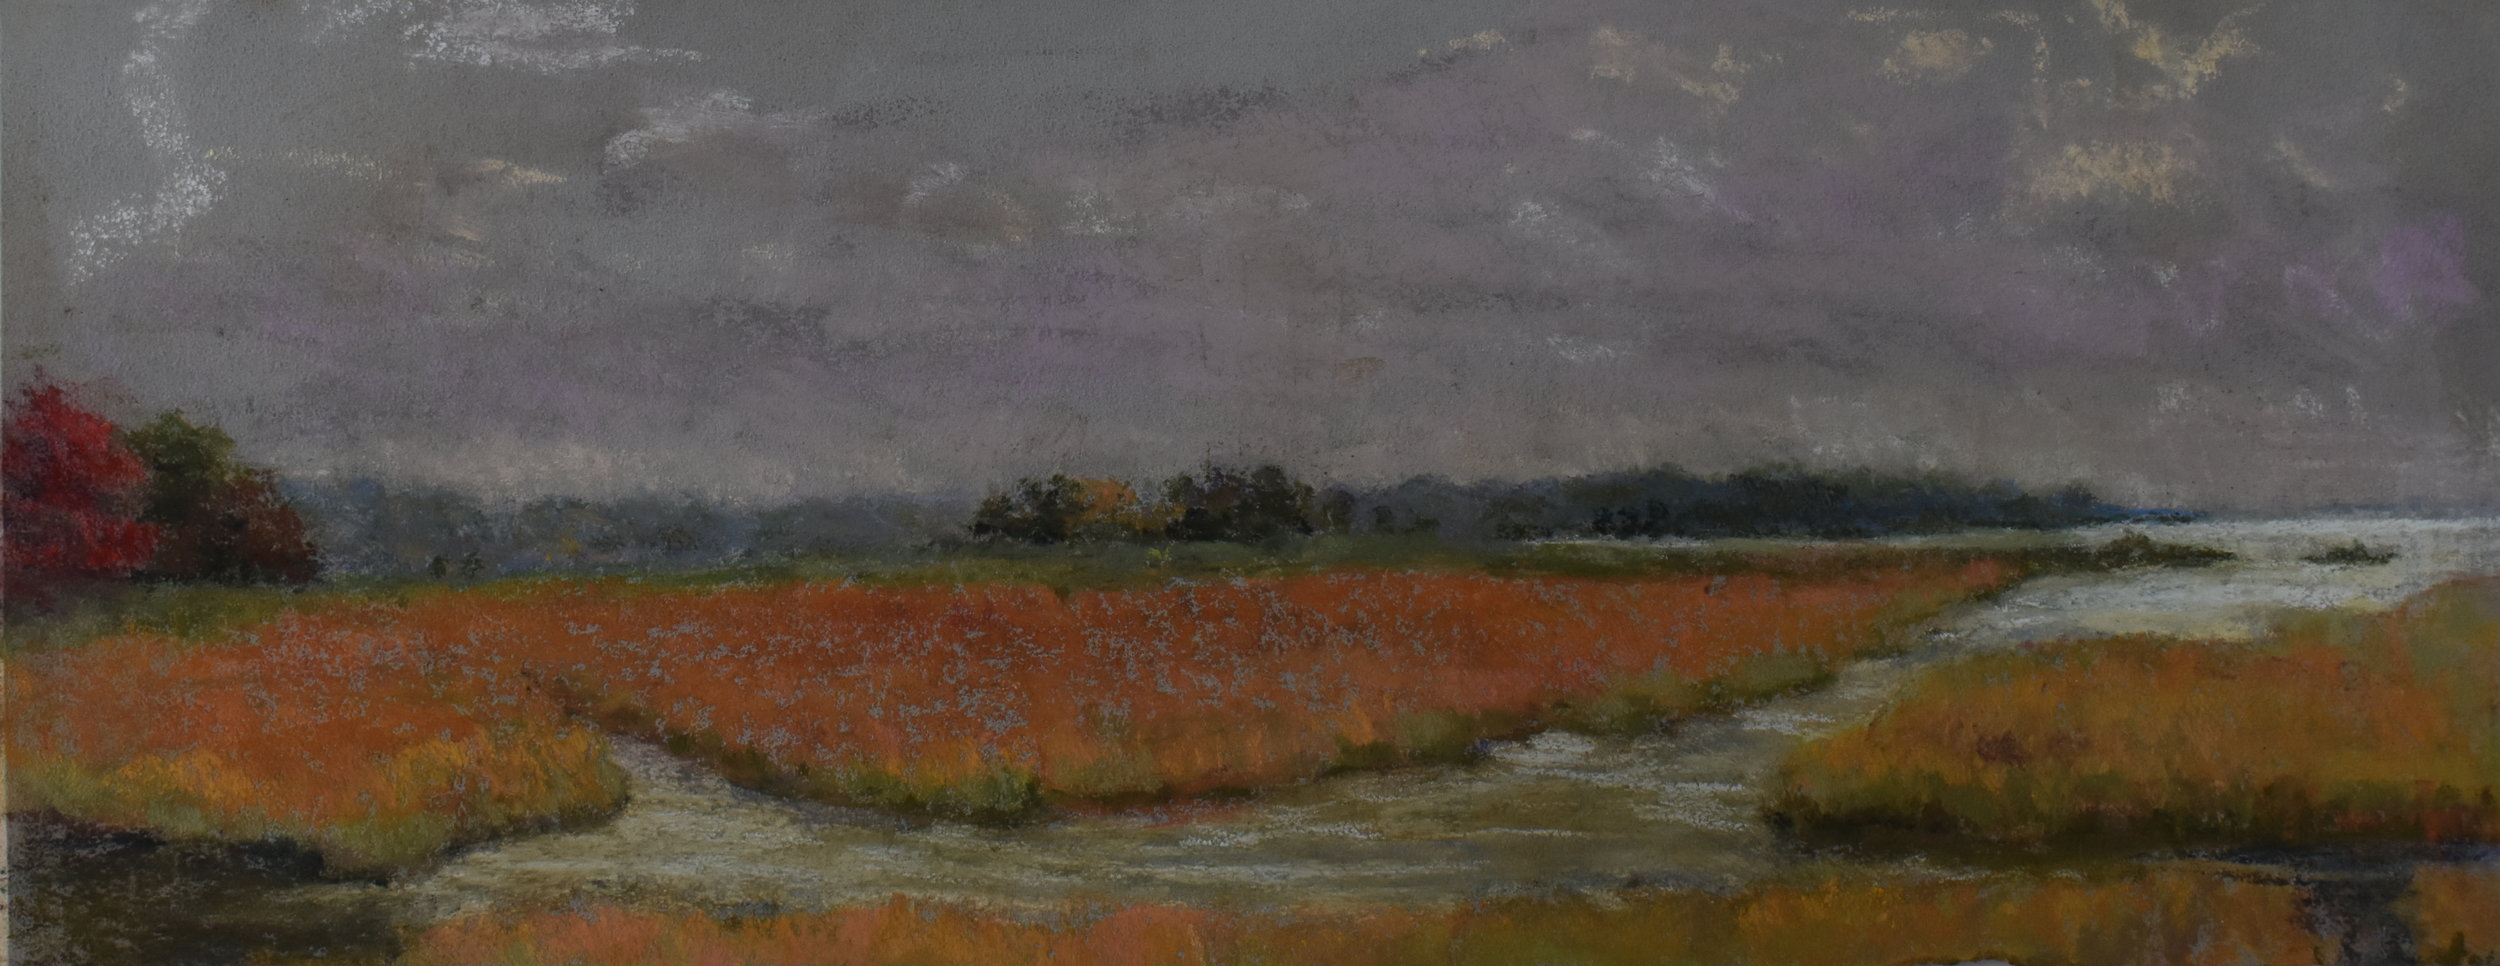 Rain drenched Marsh,Scarborough -6" x 14"